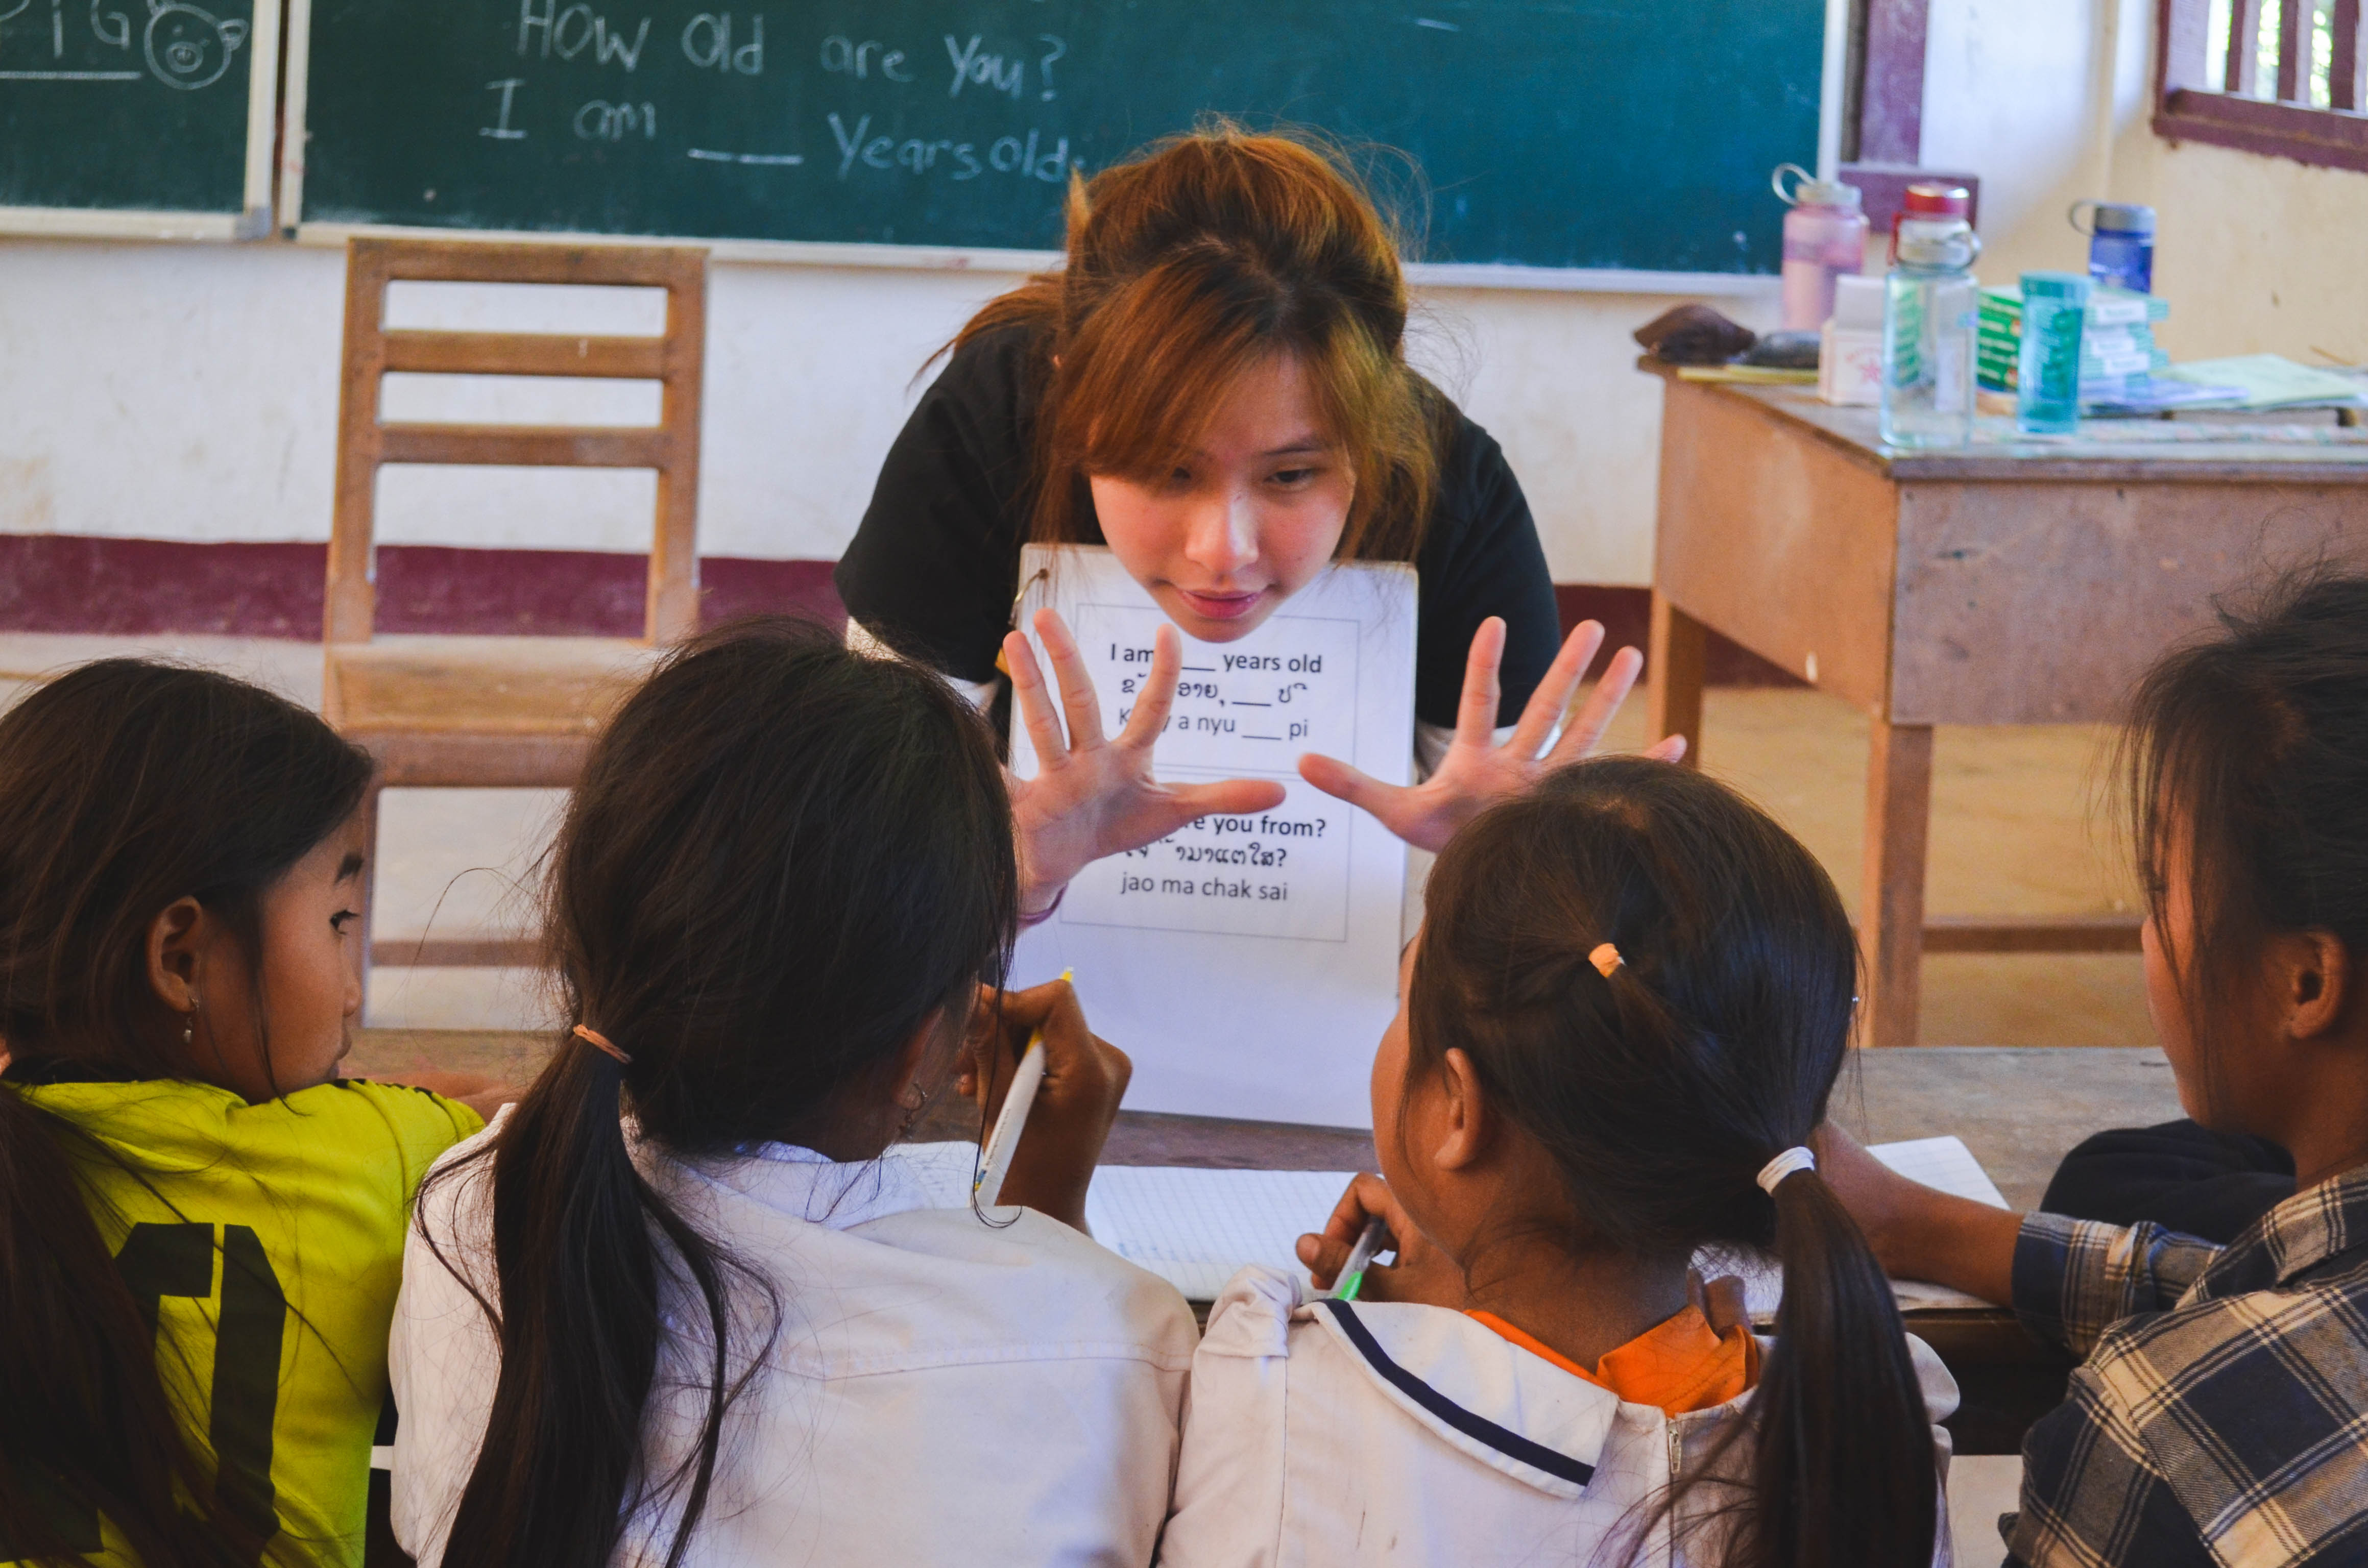 Our volunteer, Nicolette, being super hands-on while teaching the children basic conversational English.